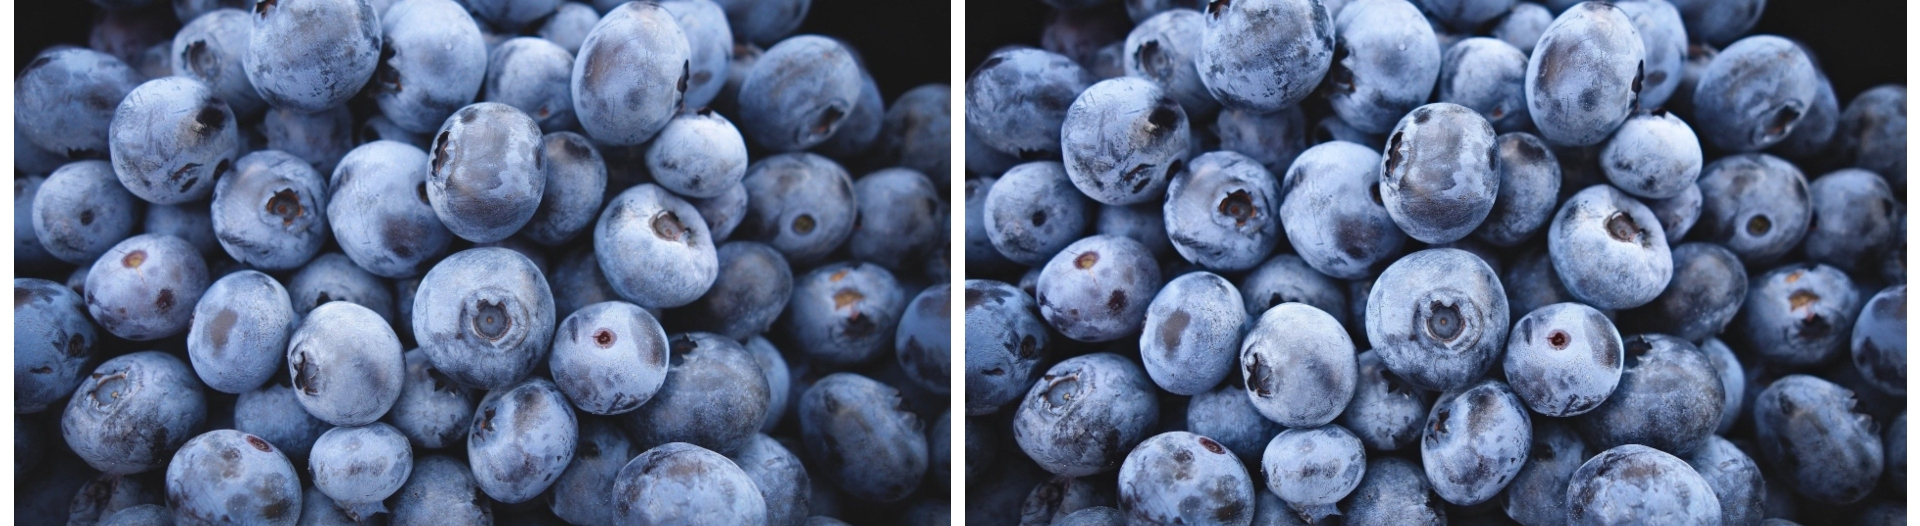 Final Results Before and After Sharpen DLX applied to image of blueberries